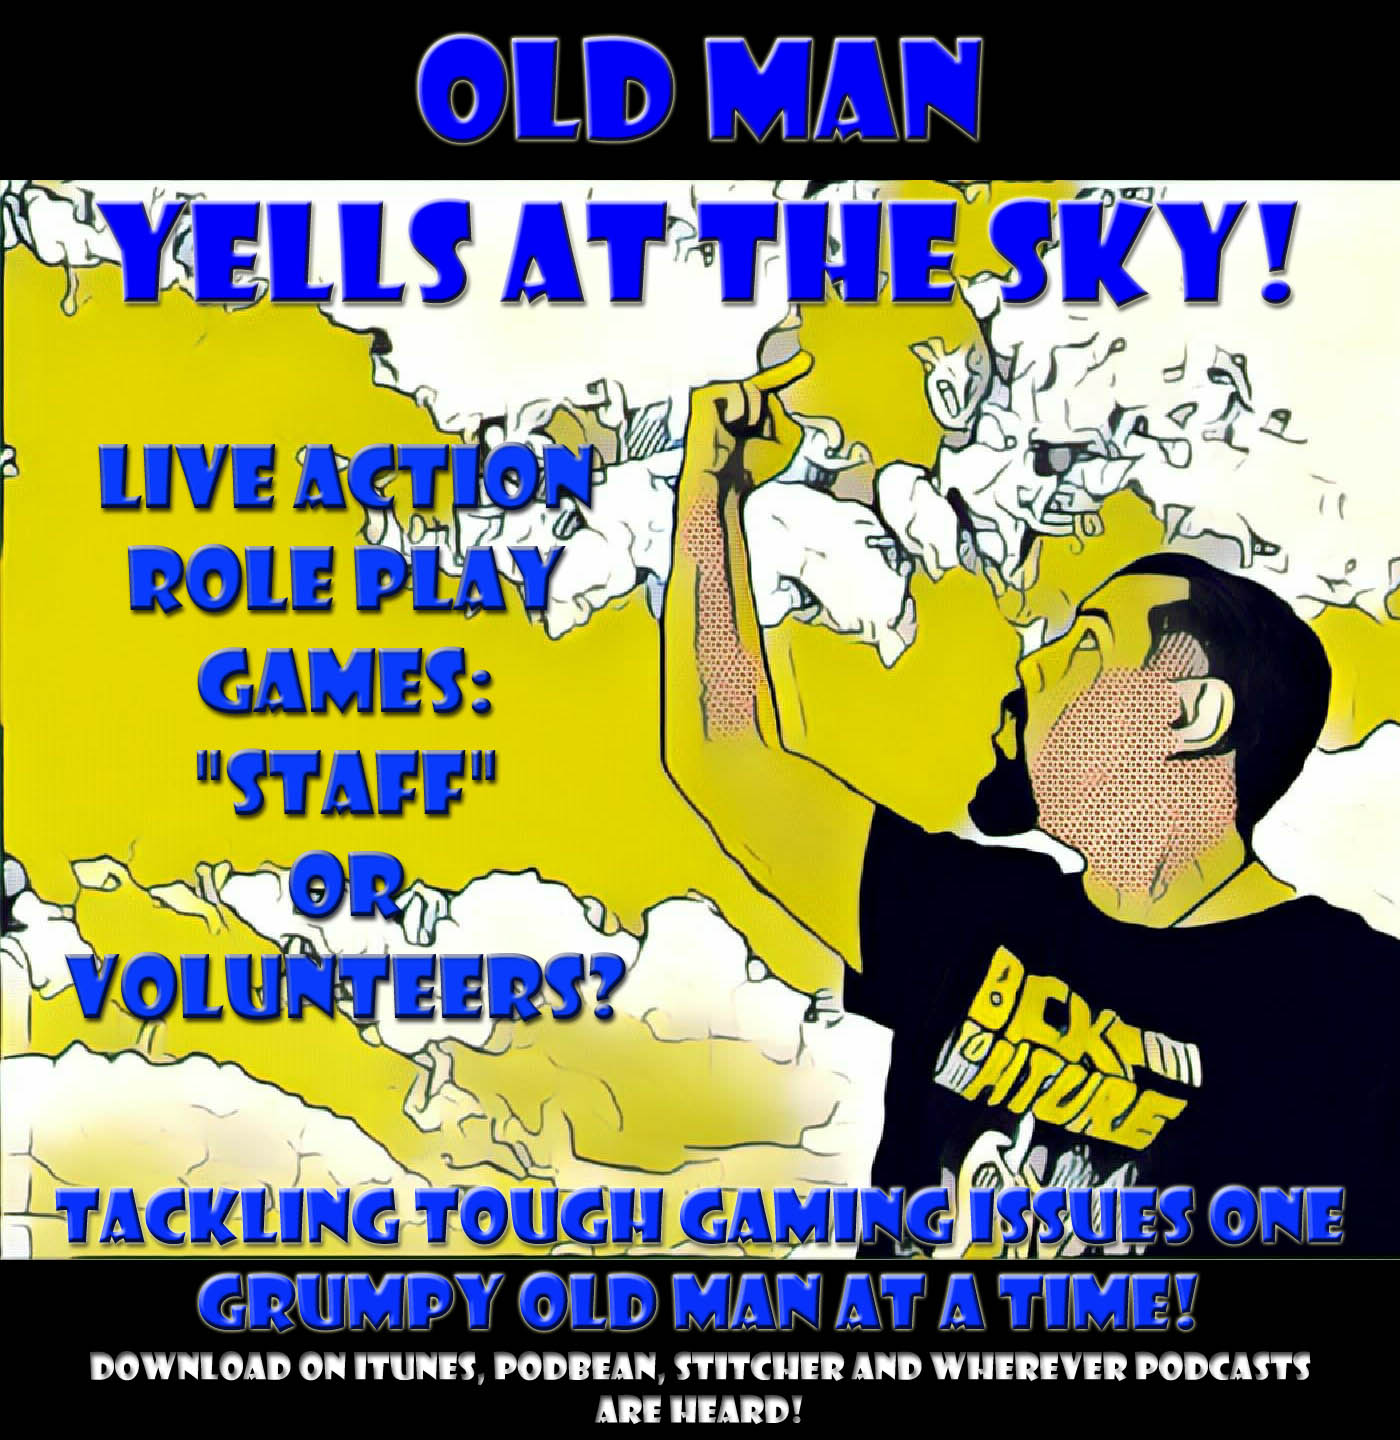 Old Man Yells at the Sky - Live Action Role Play Games: "Staff" of Volunteers?